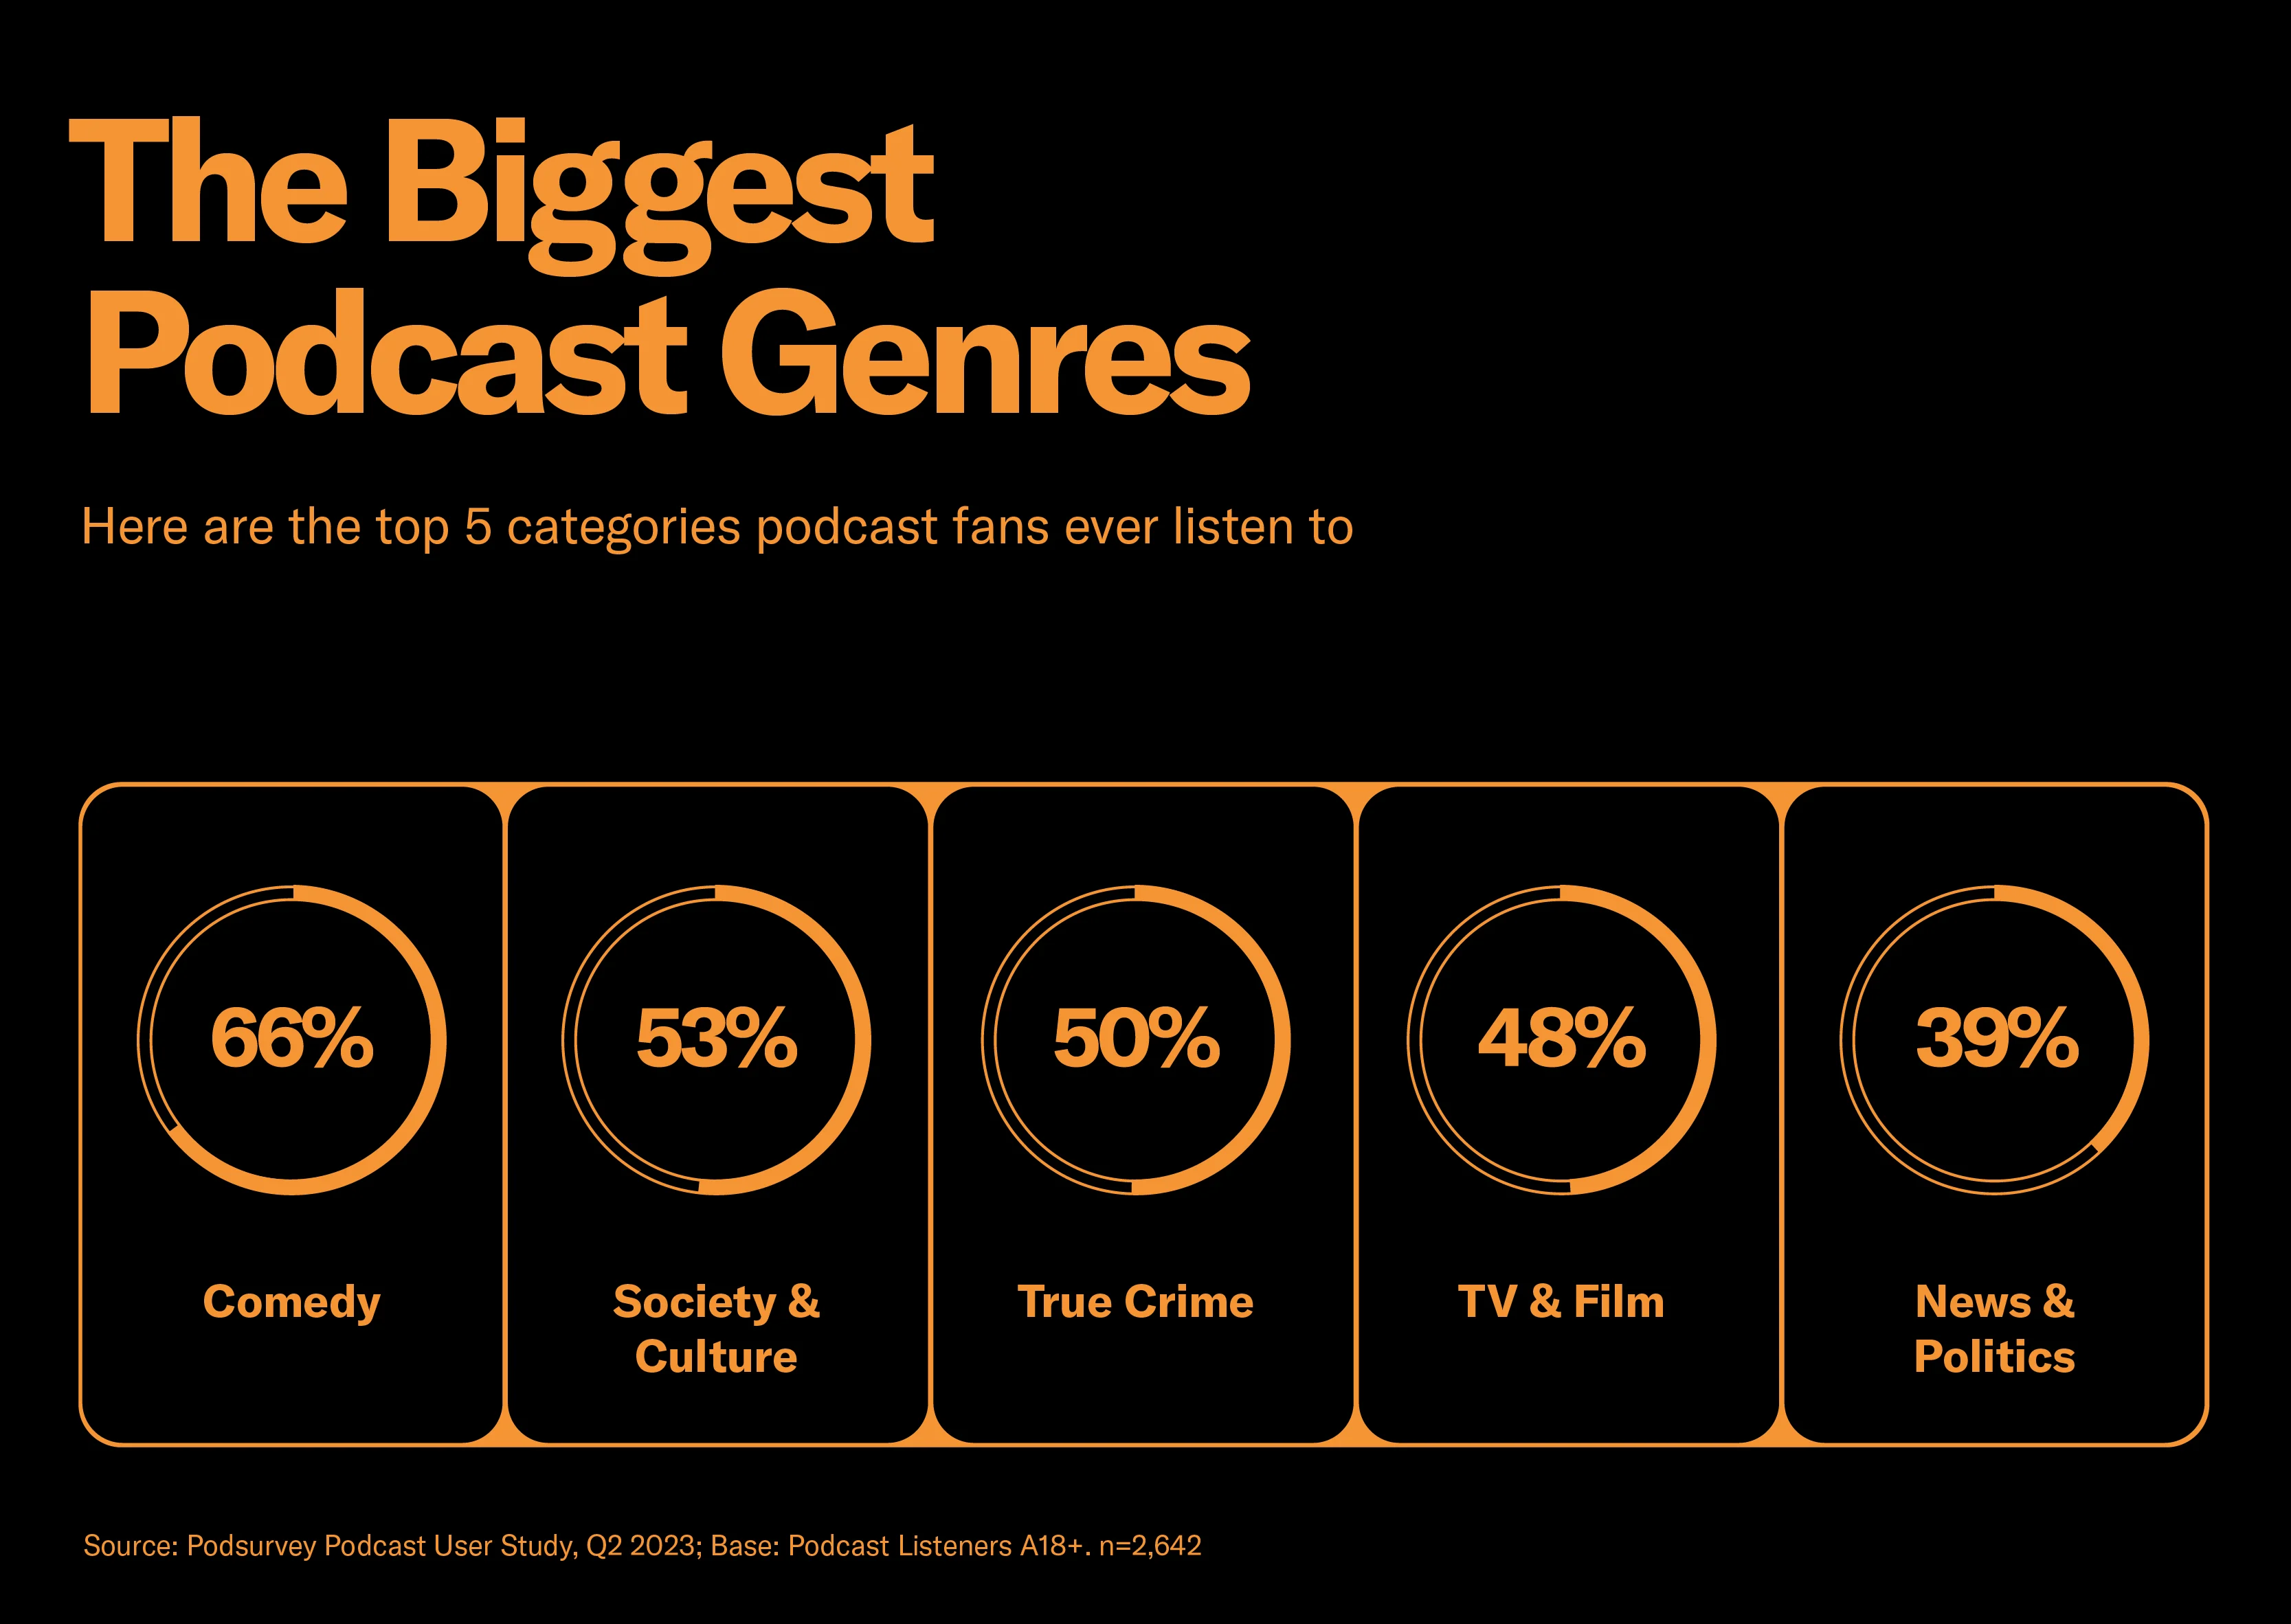 The biggest podcast genres for advertisers